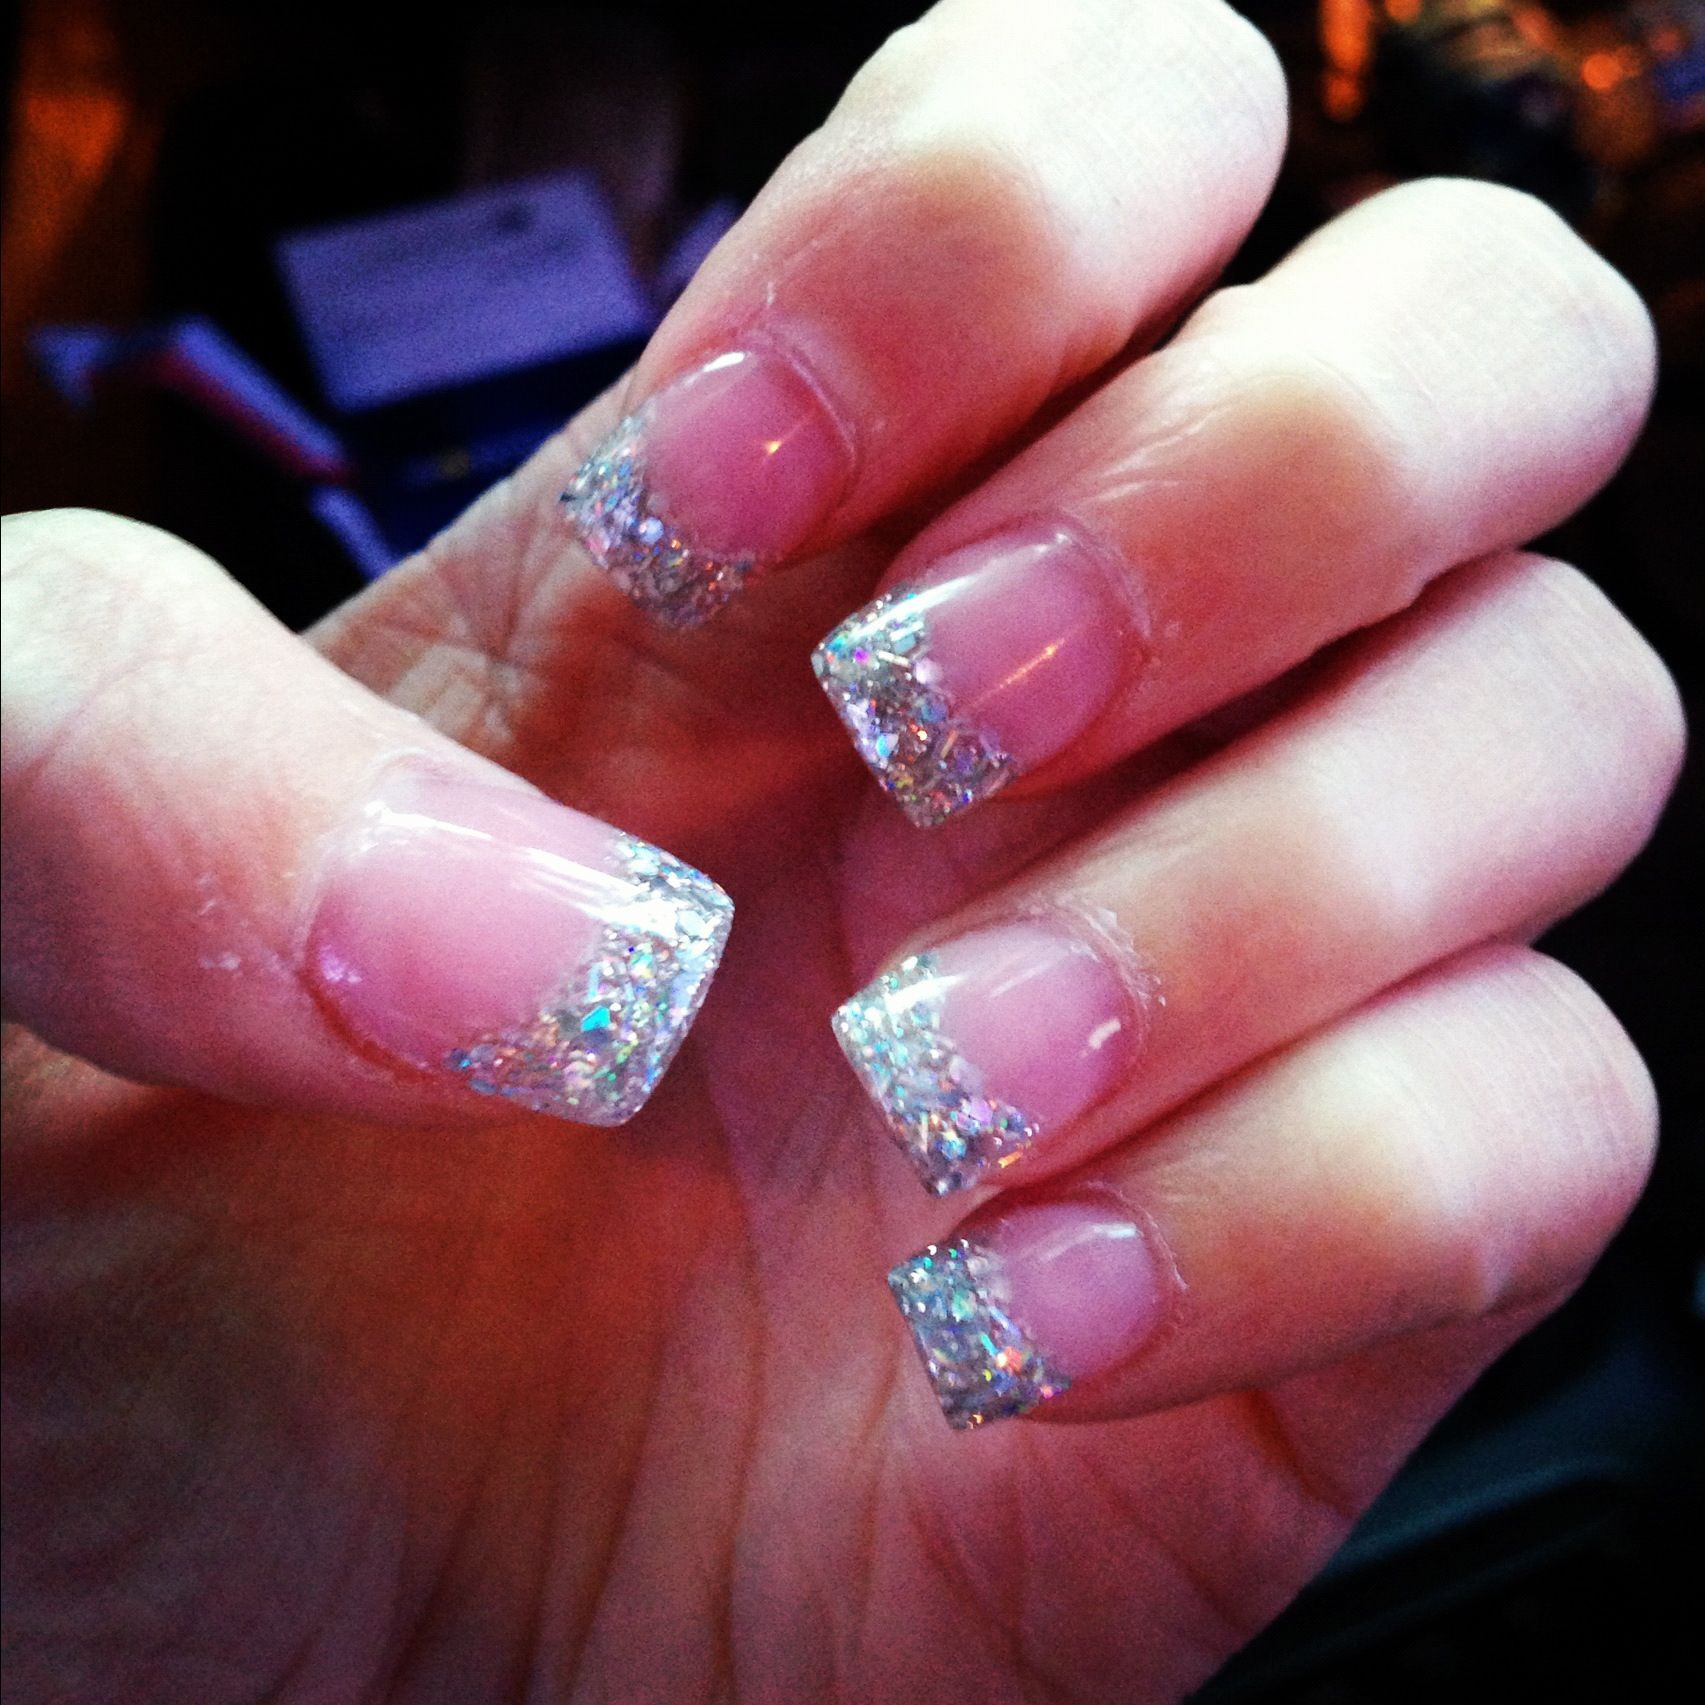 White Glitter Tip Nails
 Pink and white acrylic with glitter tips